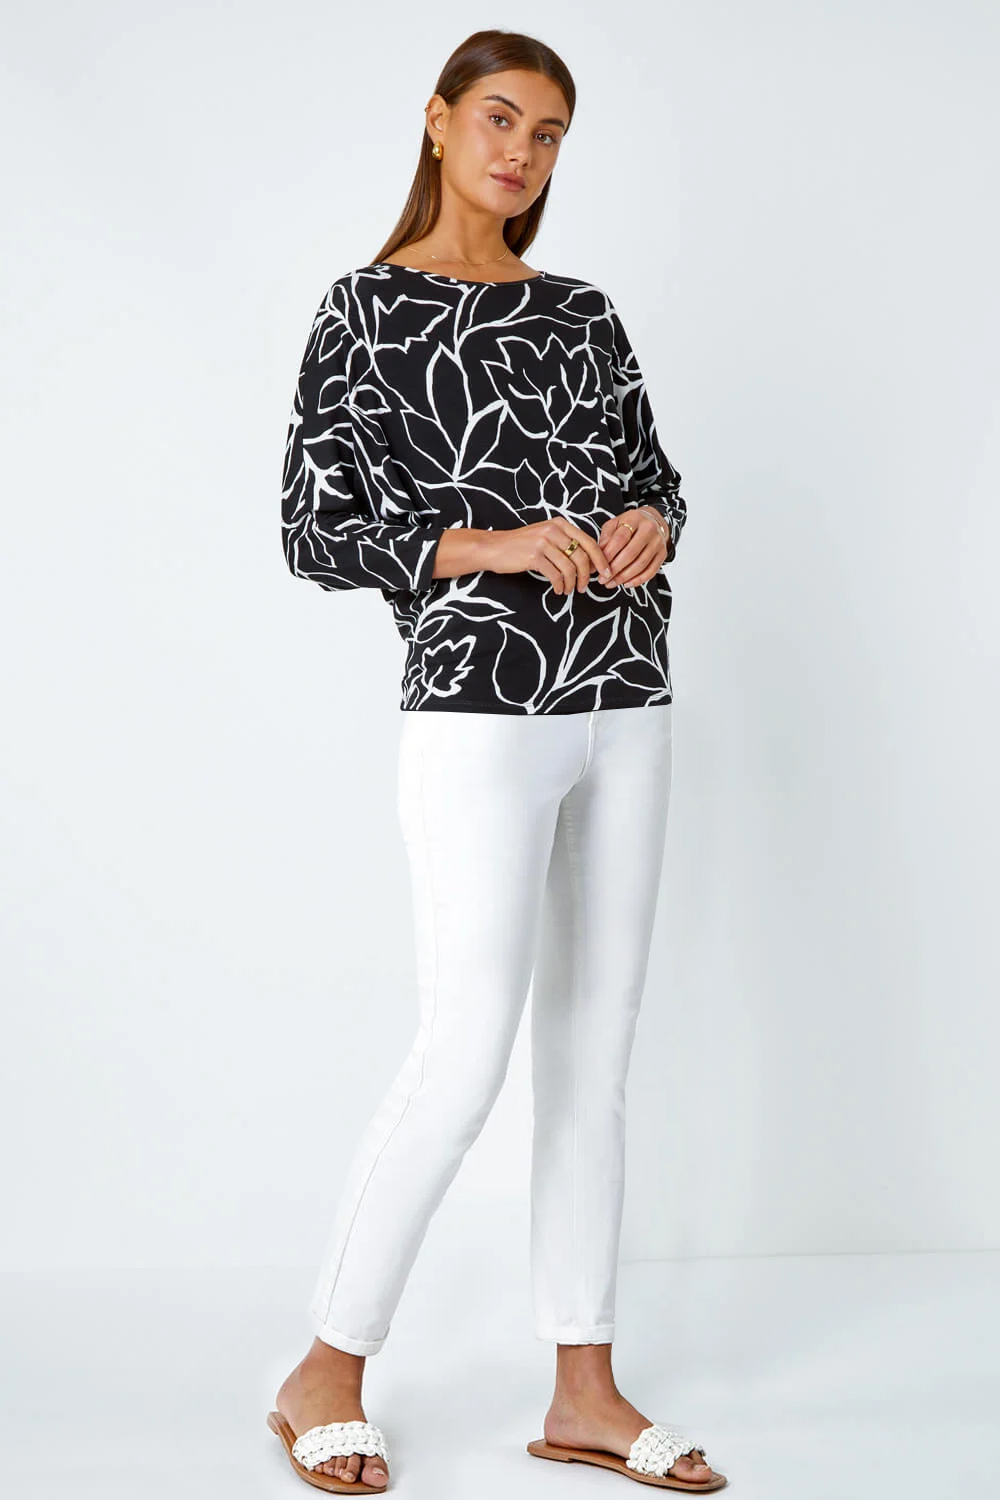 Black Contrast Floral Linear Print Stretch Top, Image 2 of 5